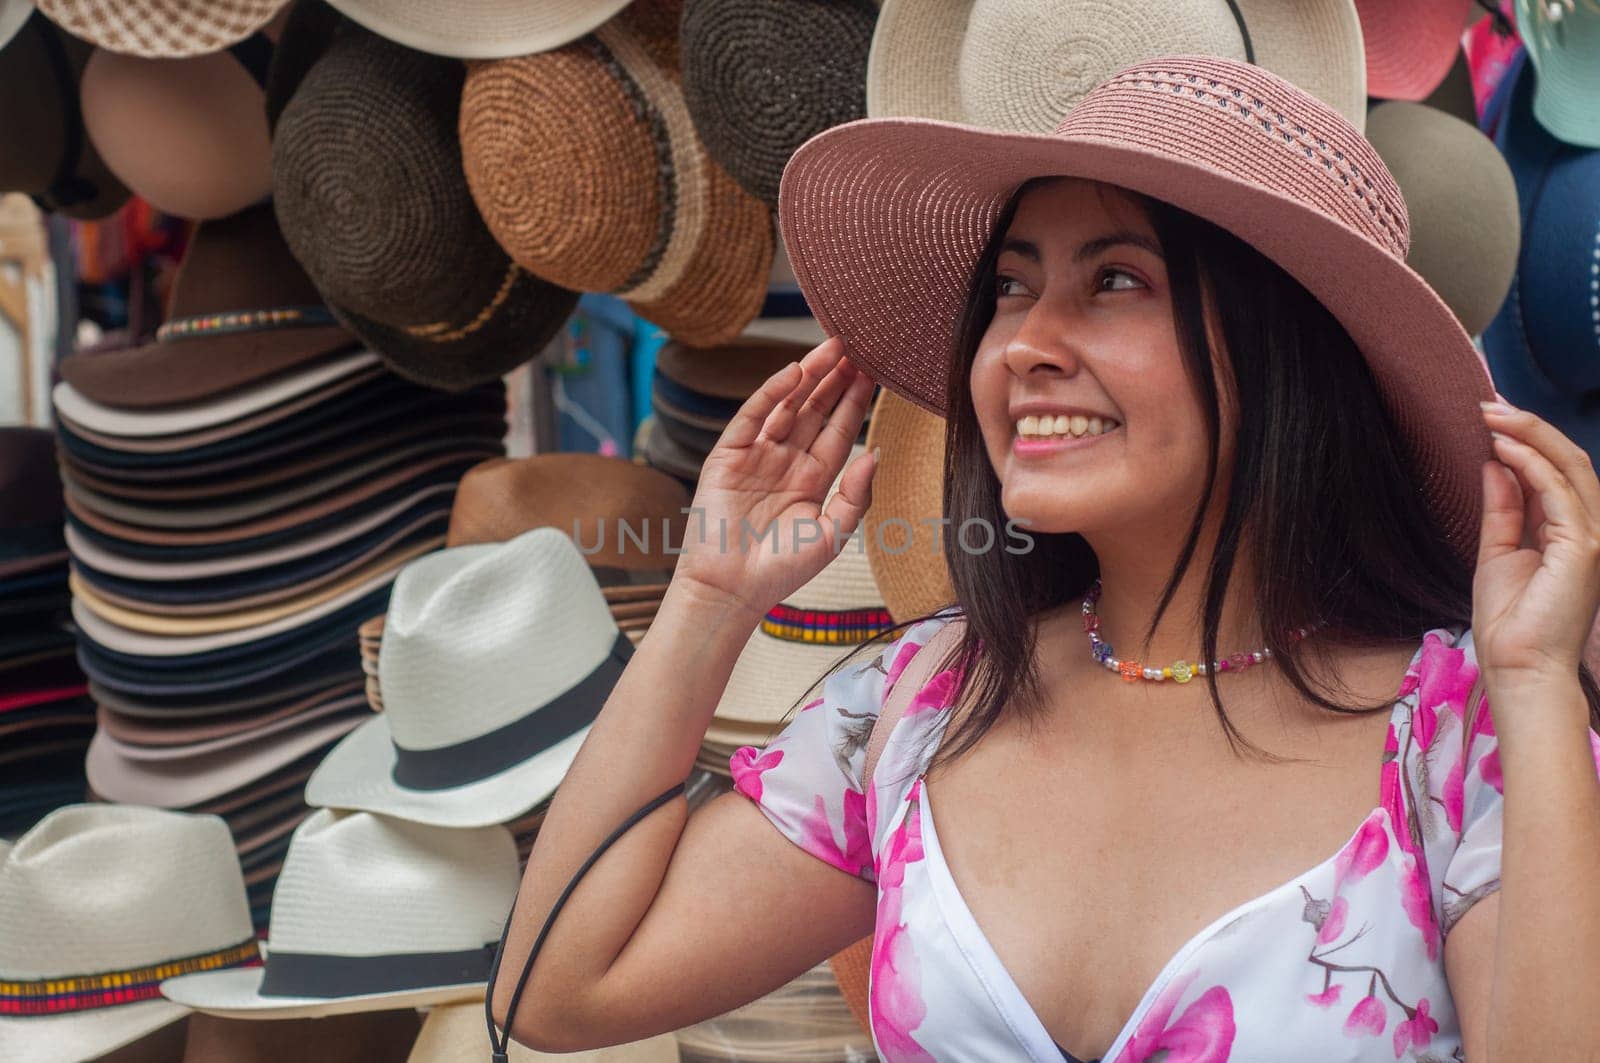 A cheerful woman tries on various hats, surrounded by a colorful selection at an outdoor market stall on a sunny day. by Raulmartin